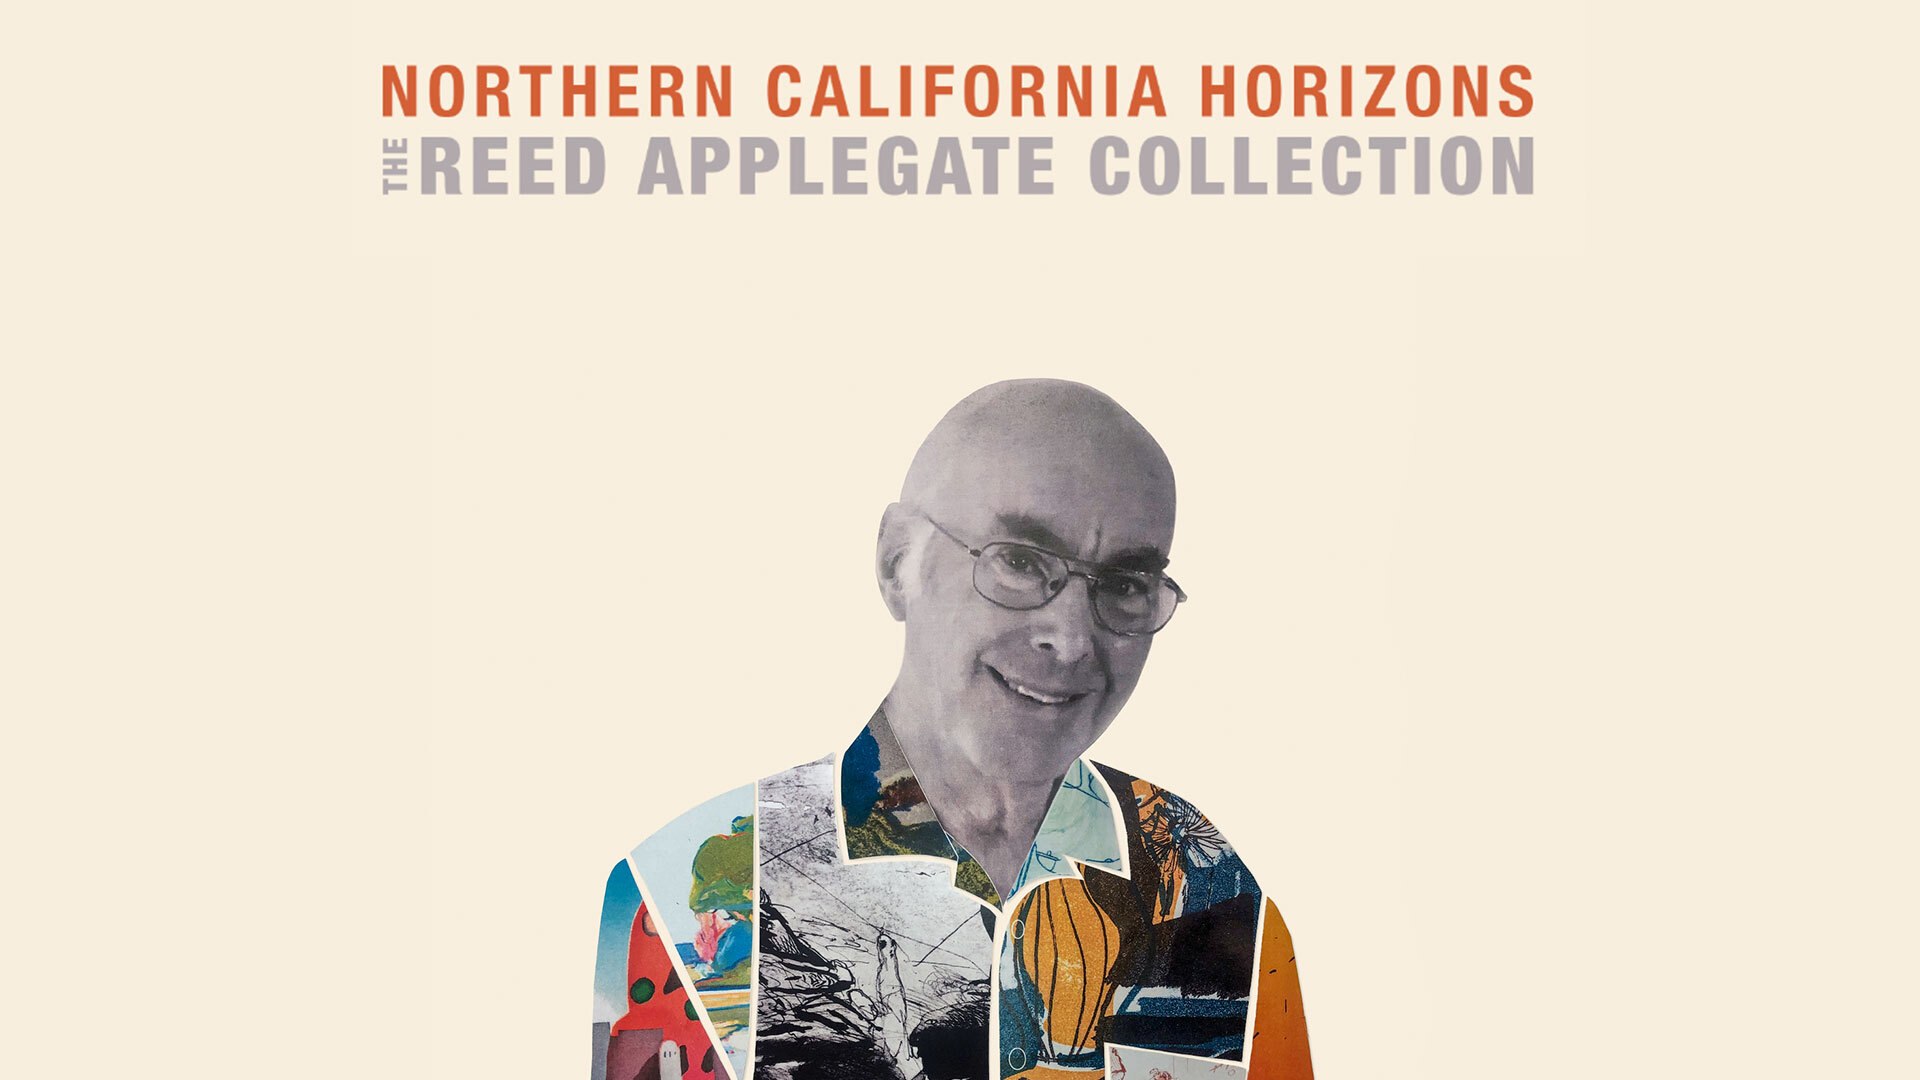 Text across the top reads: "Northern California Horizons The Reed Applegate Collection. Portrait below of Reed Applegate with collared shirt illustrated with some of the prints from his collection. Photo illustration designed by Anna Olesen.